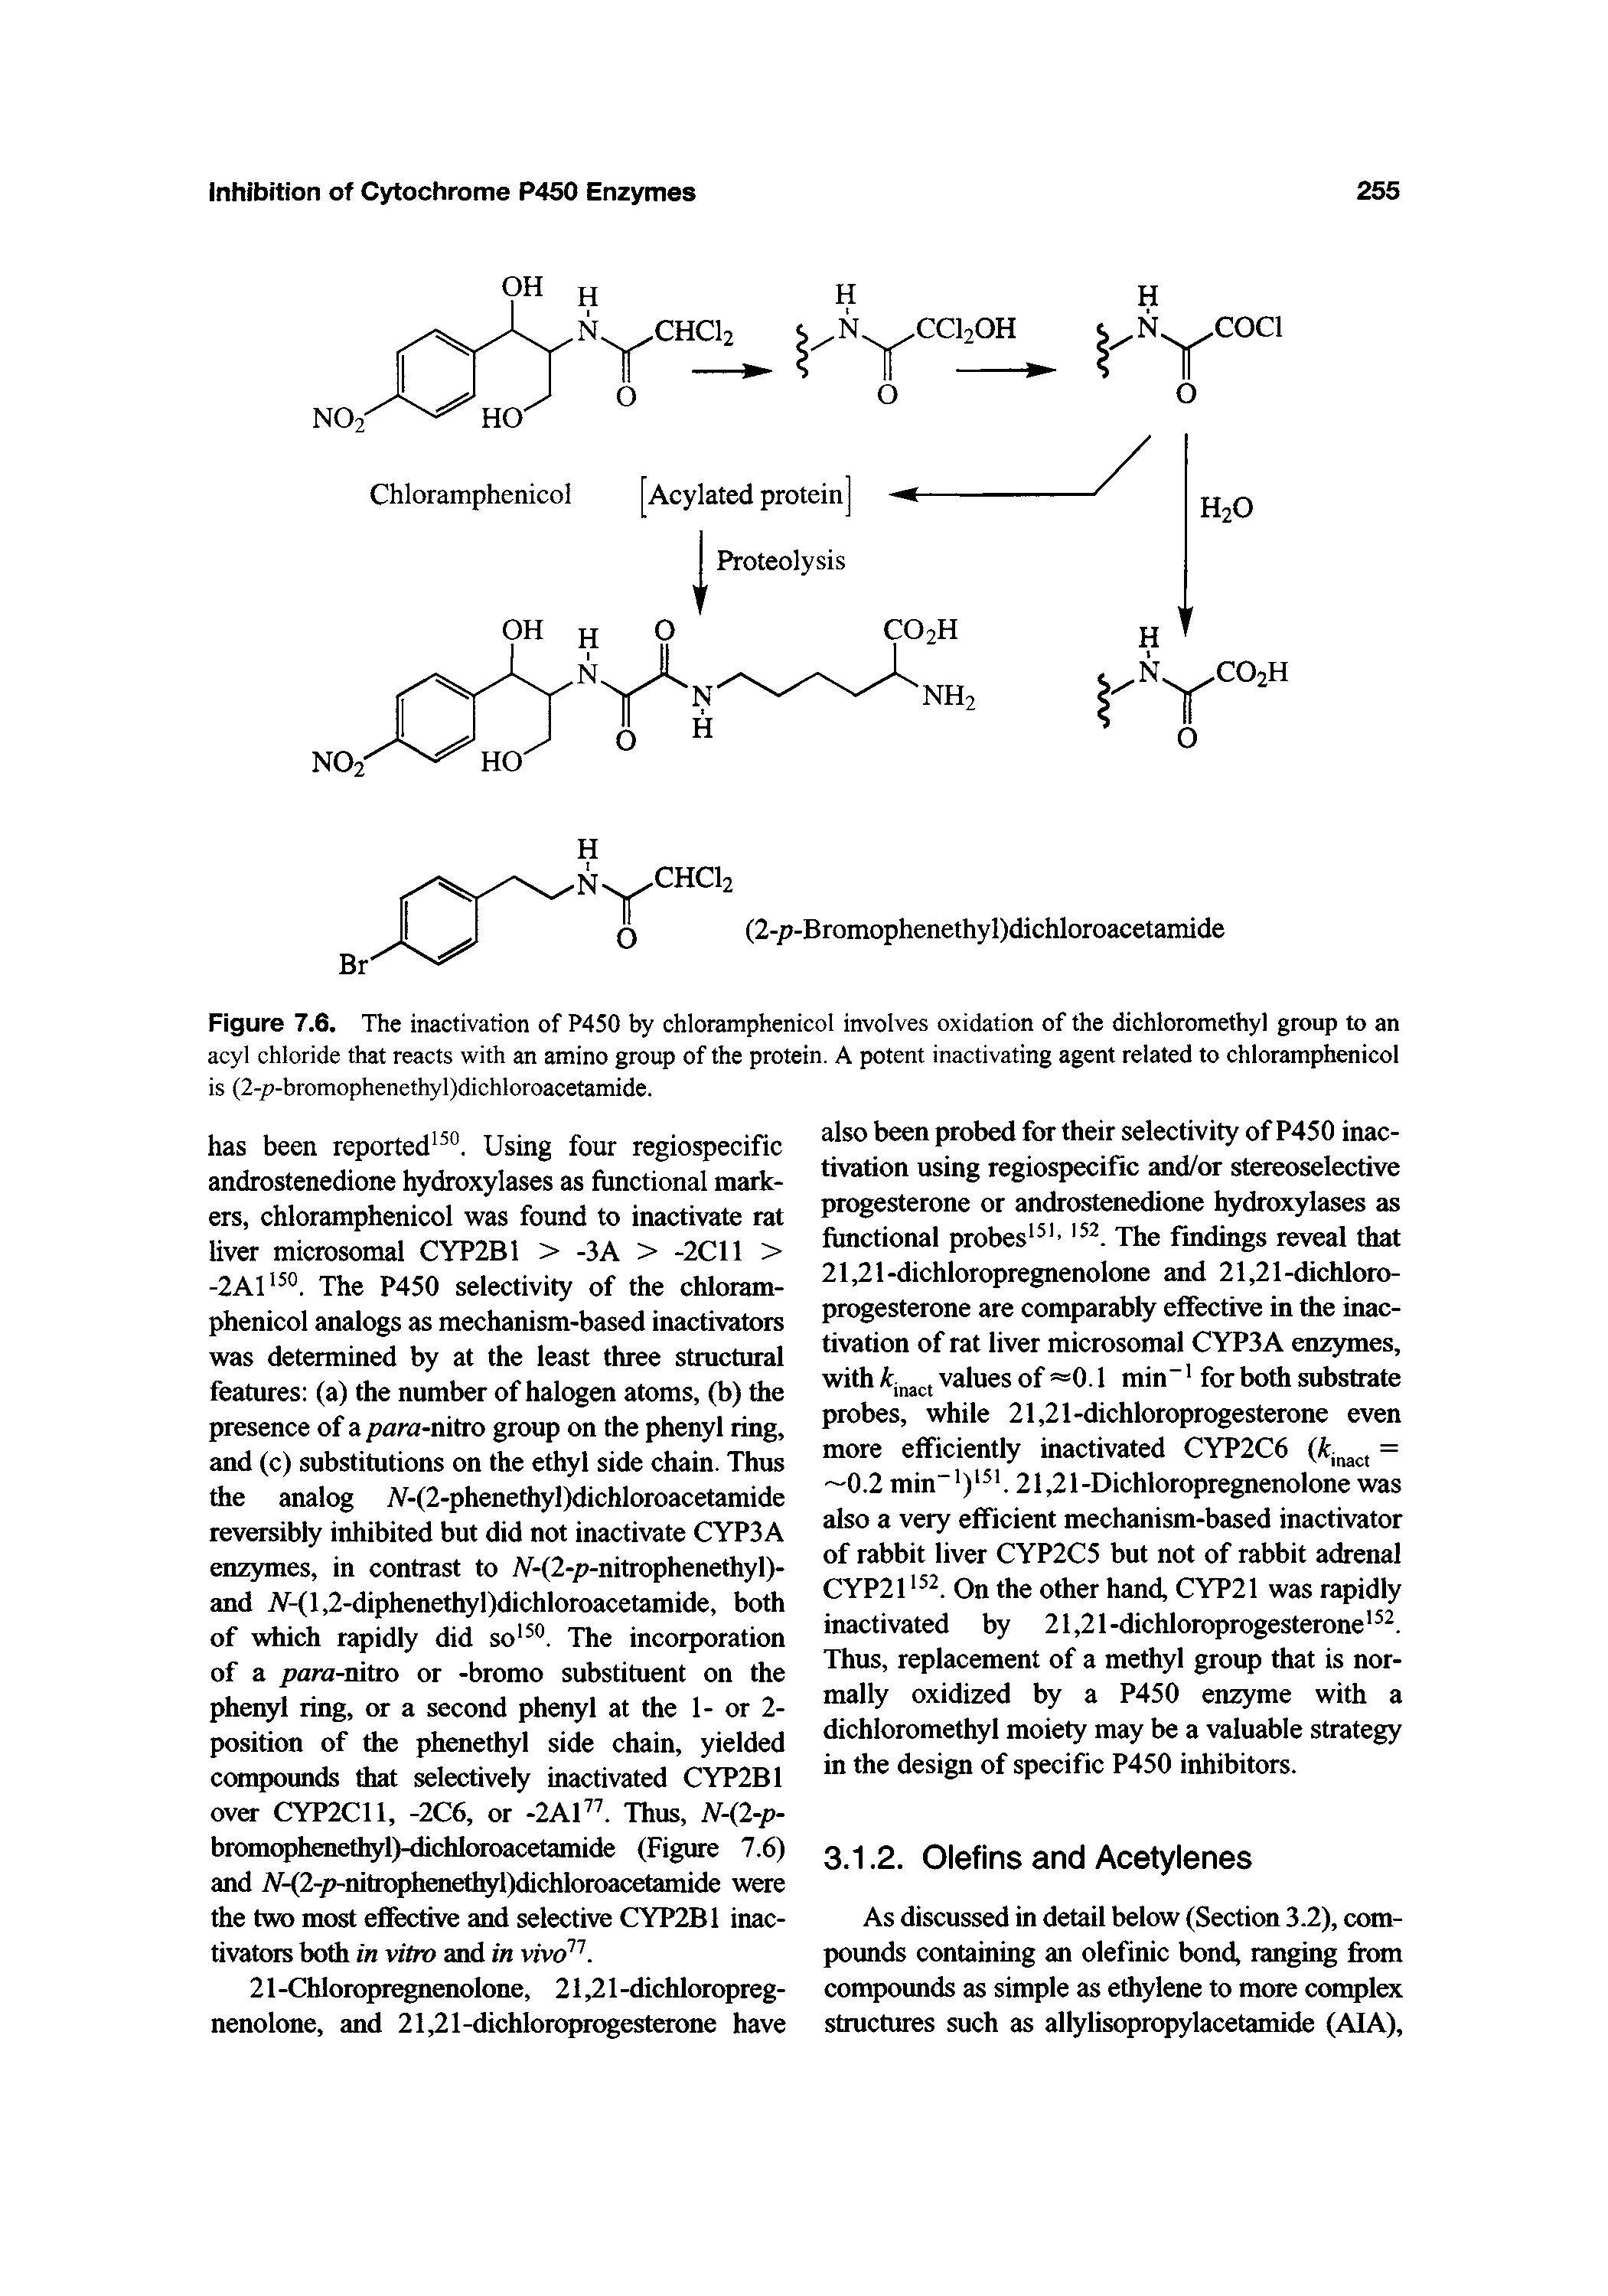 Figure 7.6. The inactivation of P450 by chloramphenicol involves oxidation of the dichloromethyl group to an acyl chloride that reacts with an amino group of the protein. A potent inactivating agent related to chloramphenicol is (2-p-bromophenethyl)dichloroacetamide.